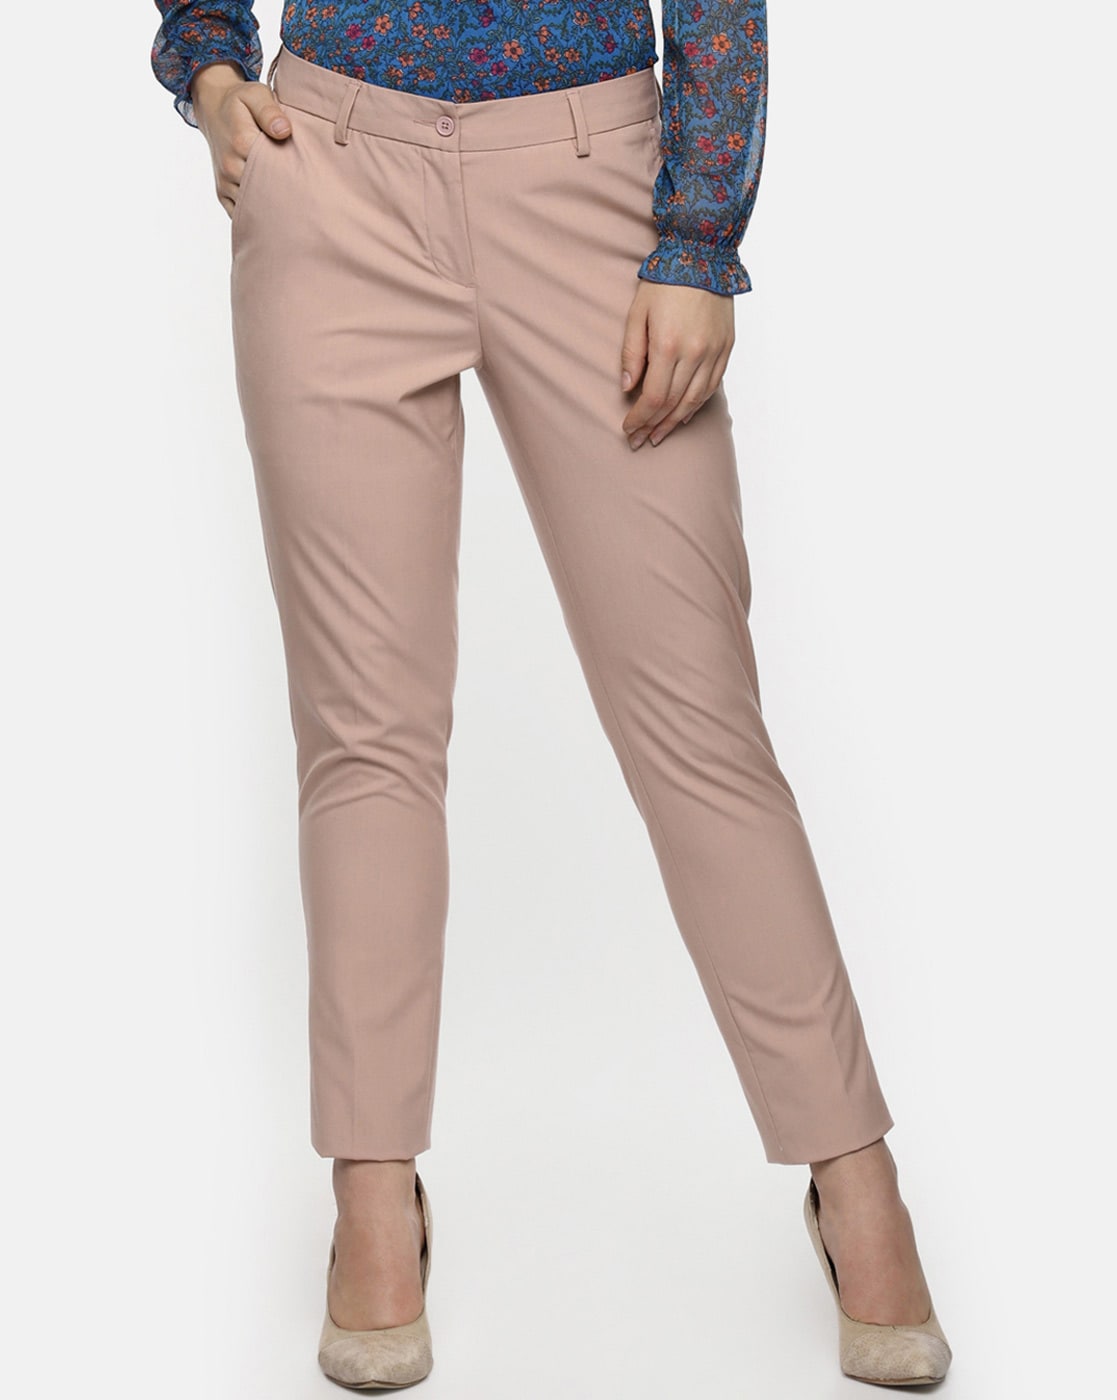 Annabelle By Pantaloons Trousers  Buy Annabelle By Pantaloons Trousers  online in India